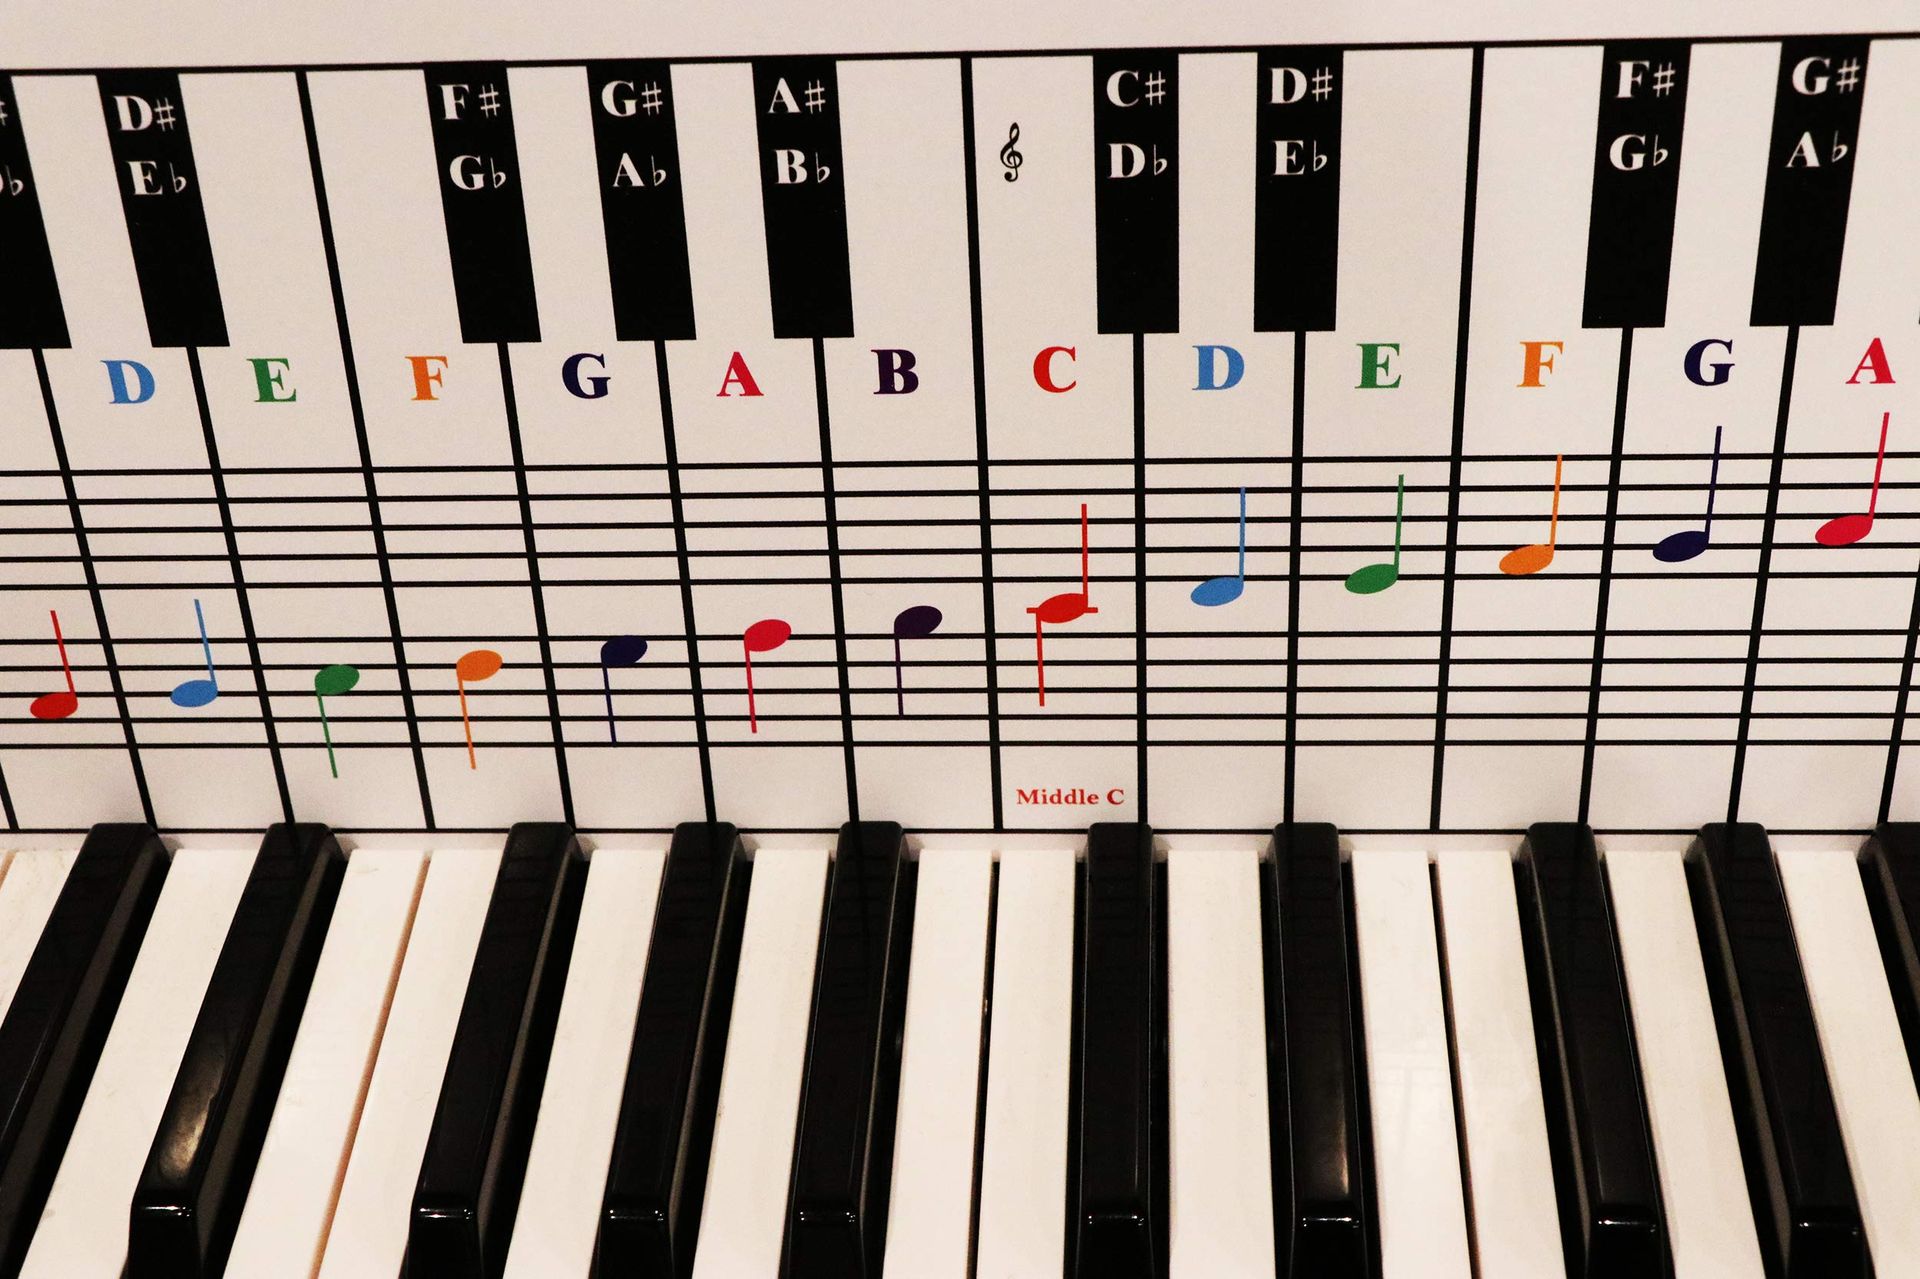 How To Make A Music Note With Keyboard